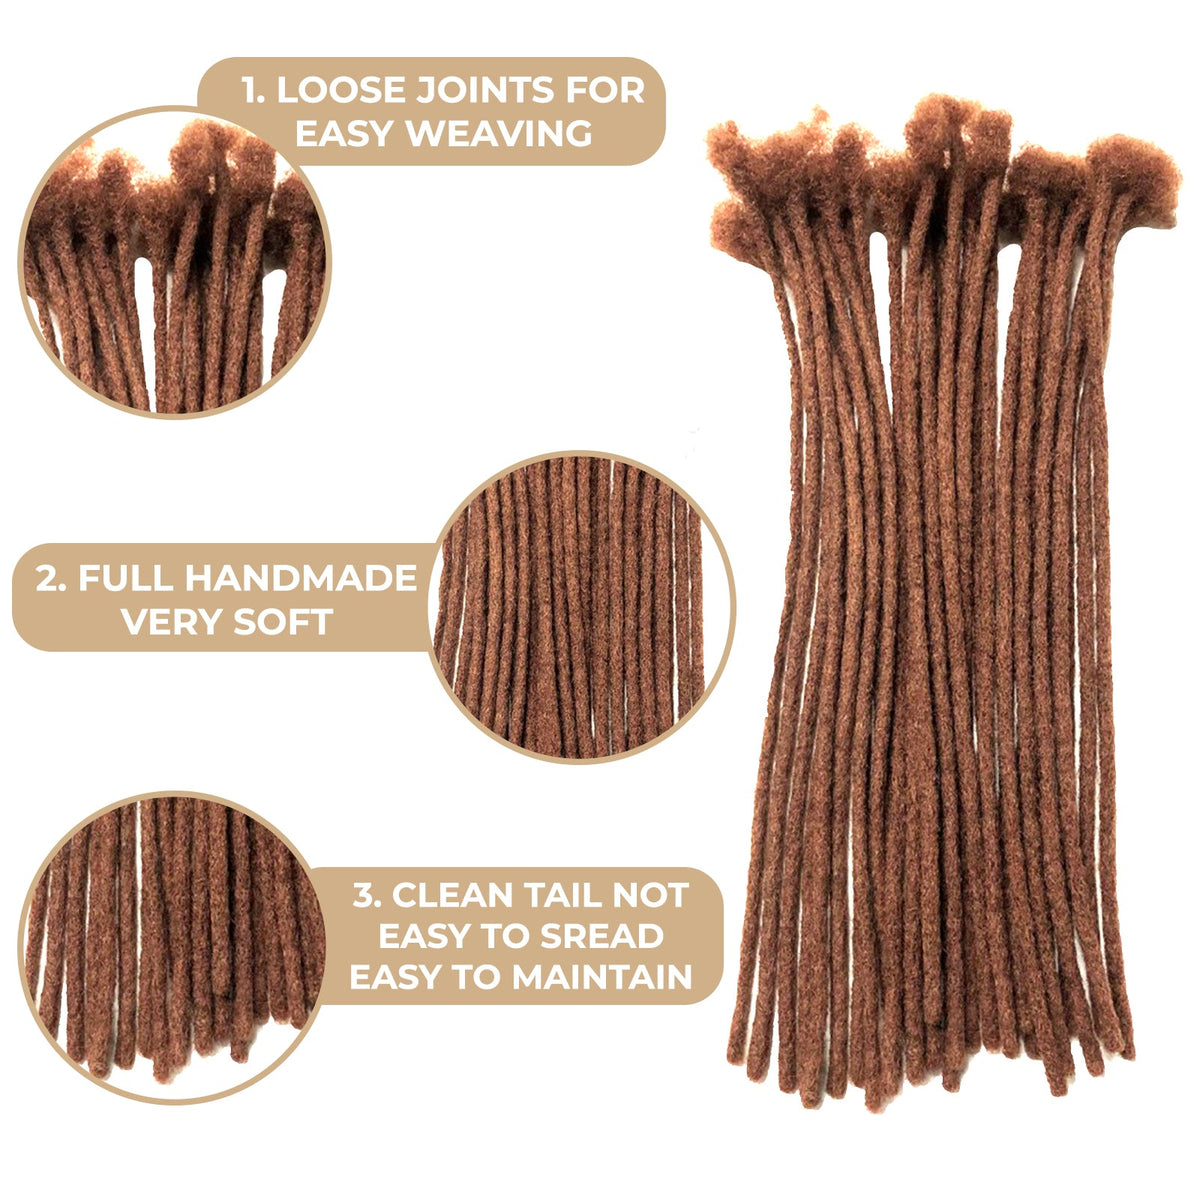 100% Human Hair Dreadlock Extensions 8 Inch 10 Strands Handmade Natural Loc Extensions Human Hair Bundle Dreads Extensions For Woman & Men Can Be Dyed/Bleached  (8 Inch 10 Strands, 0.8cm #33)